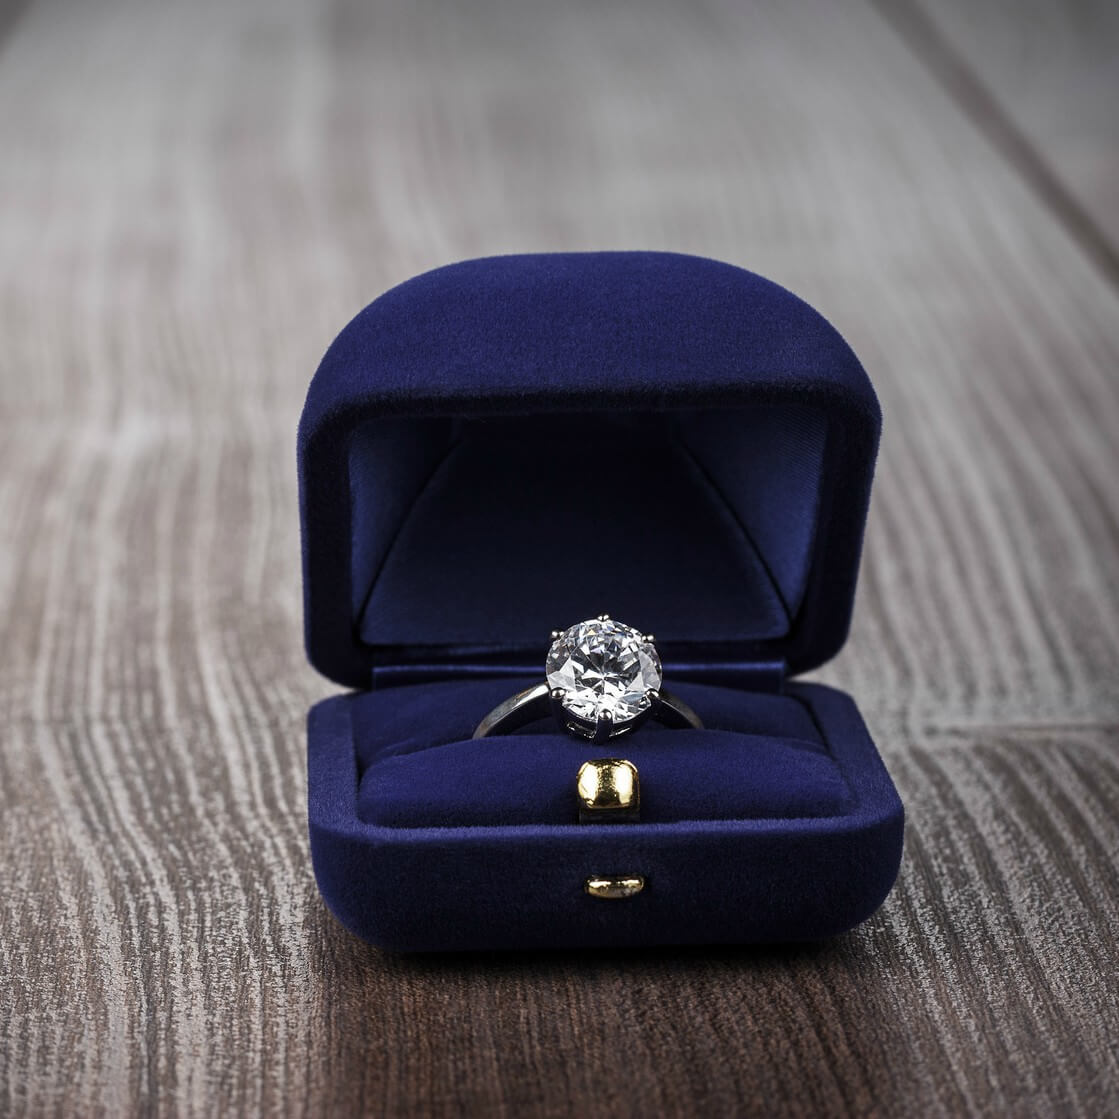 Shopping for Engagement Rings in Dallas, TX (With Insider's Tips)